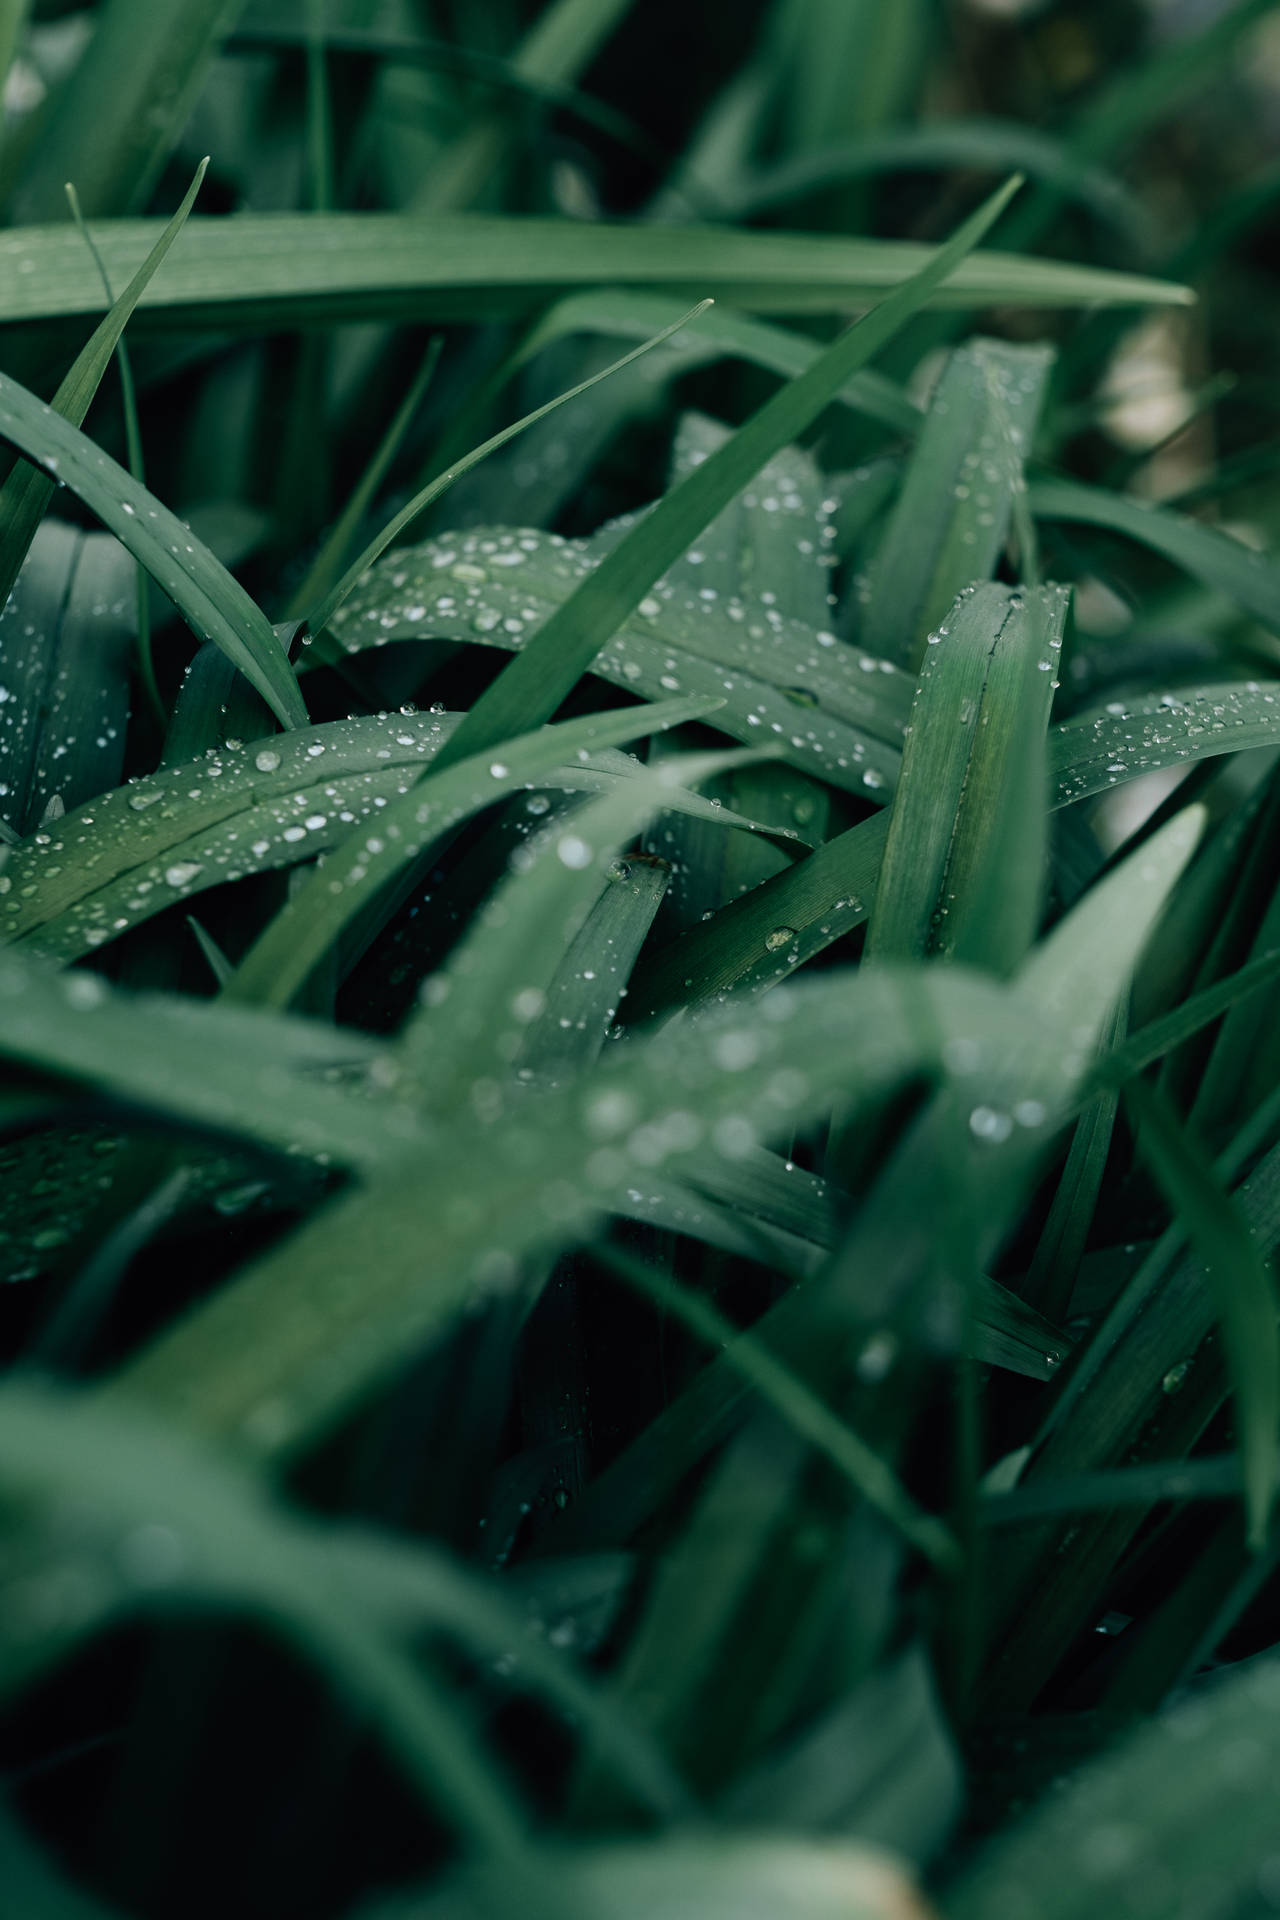 Water Droplets On Grass Background